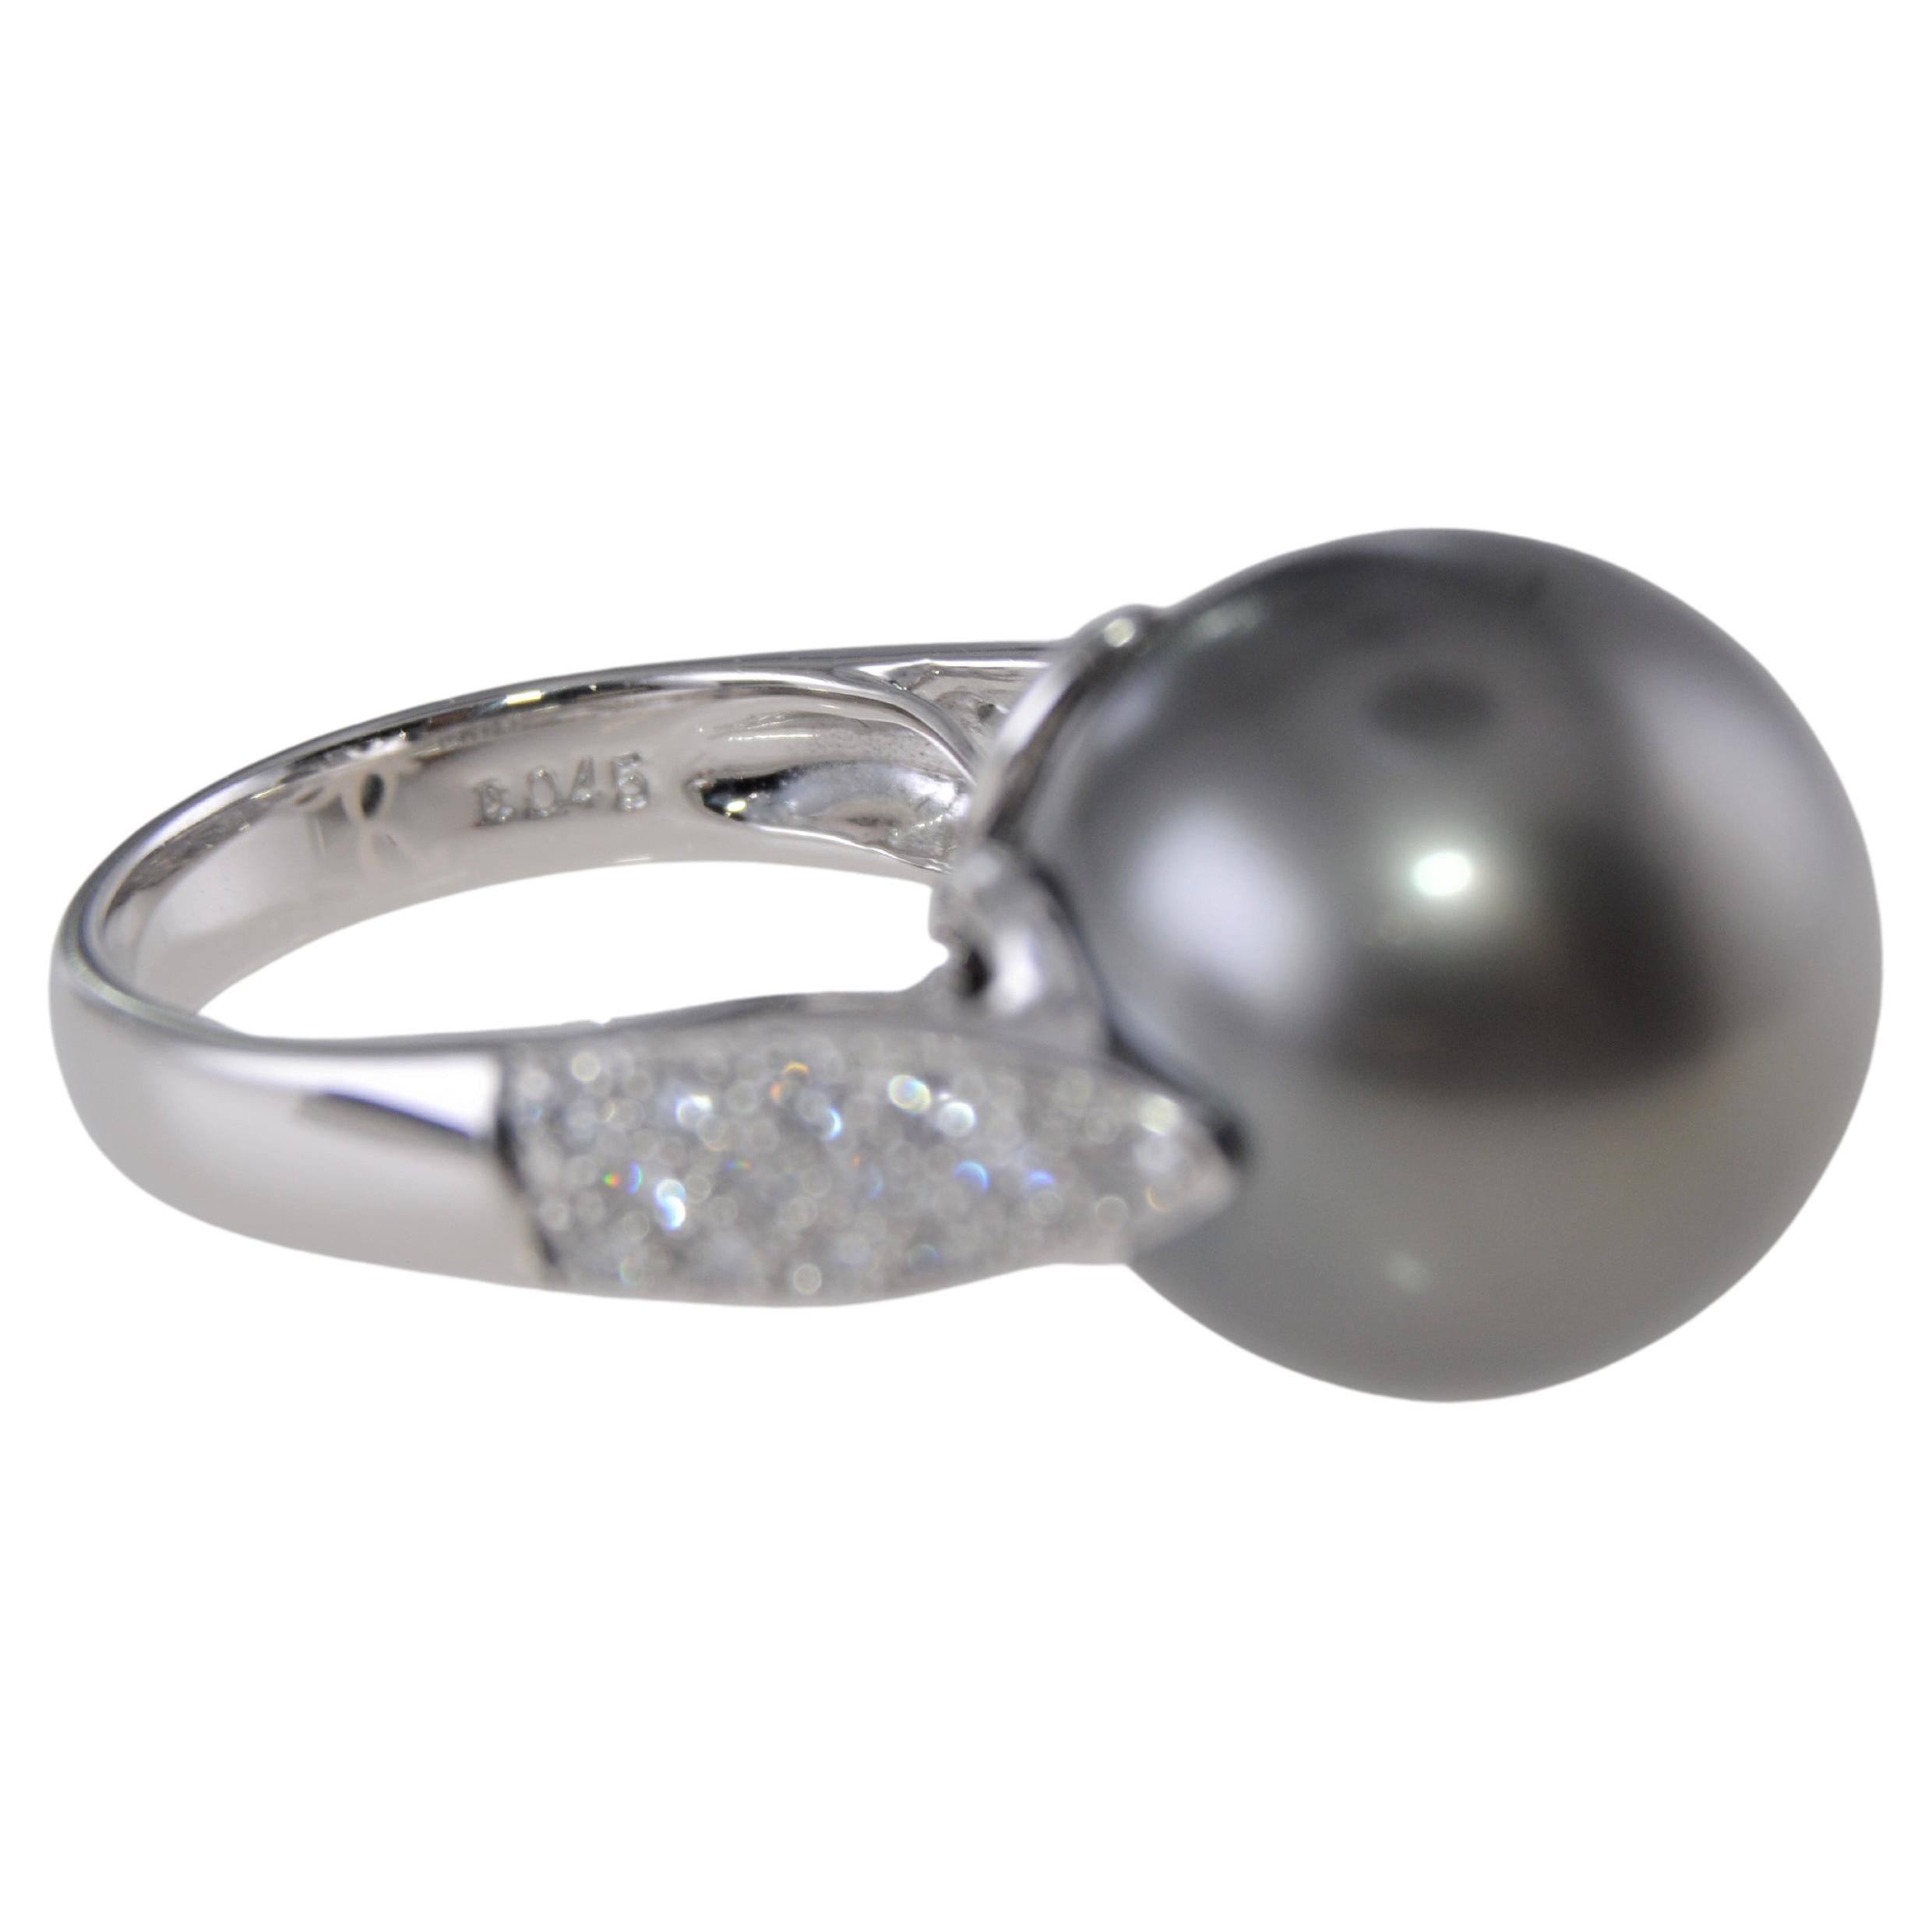 
STYLE / REFERENCE: Cocktail Ring
METAL / MATERIAL: Platinum
CIRCA / YEAR: Contemporary
CENTER STONE: 15.70mm
ACCENT STONES / WEIGHT: Diamonds 0.78ctw
SIZE:  6 1/4



This stunning ring centers an exceptionally large and lustrous, natural black,